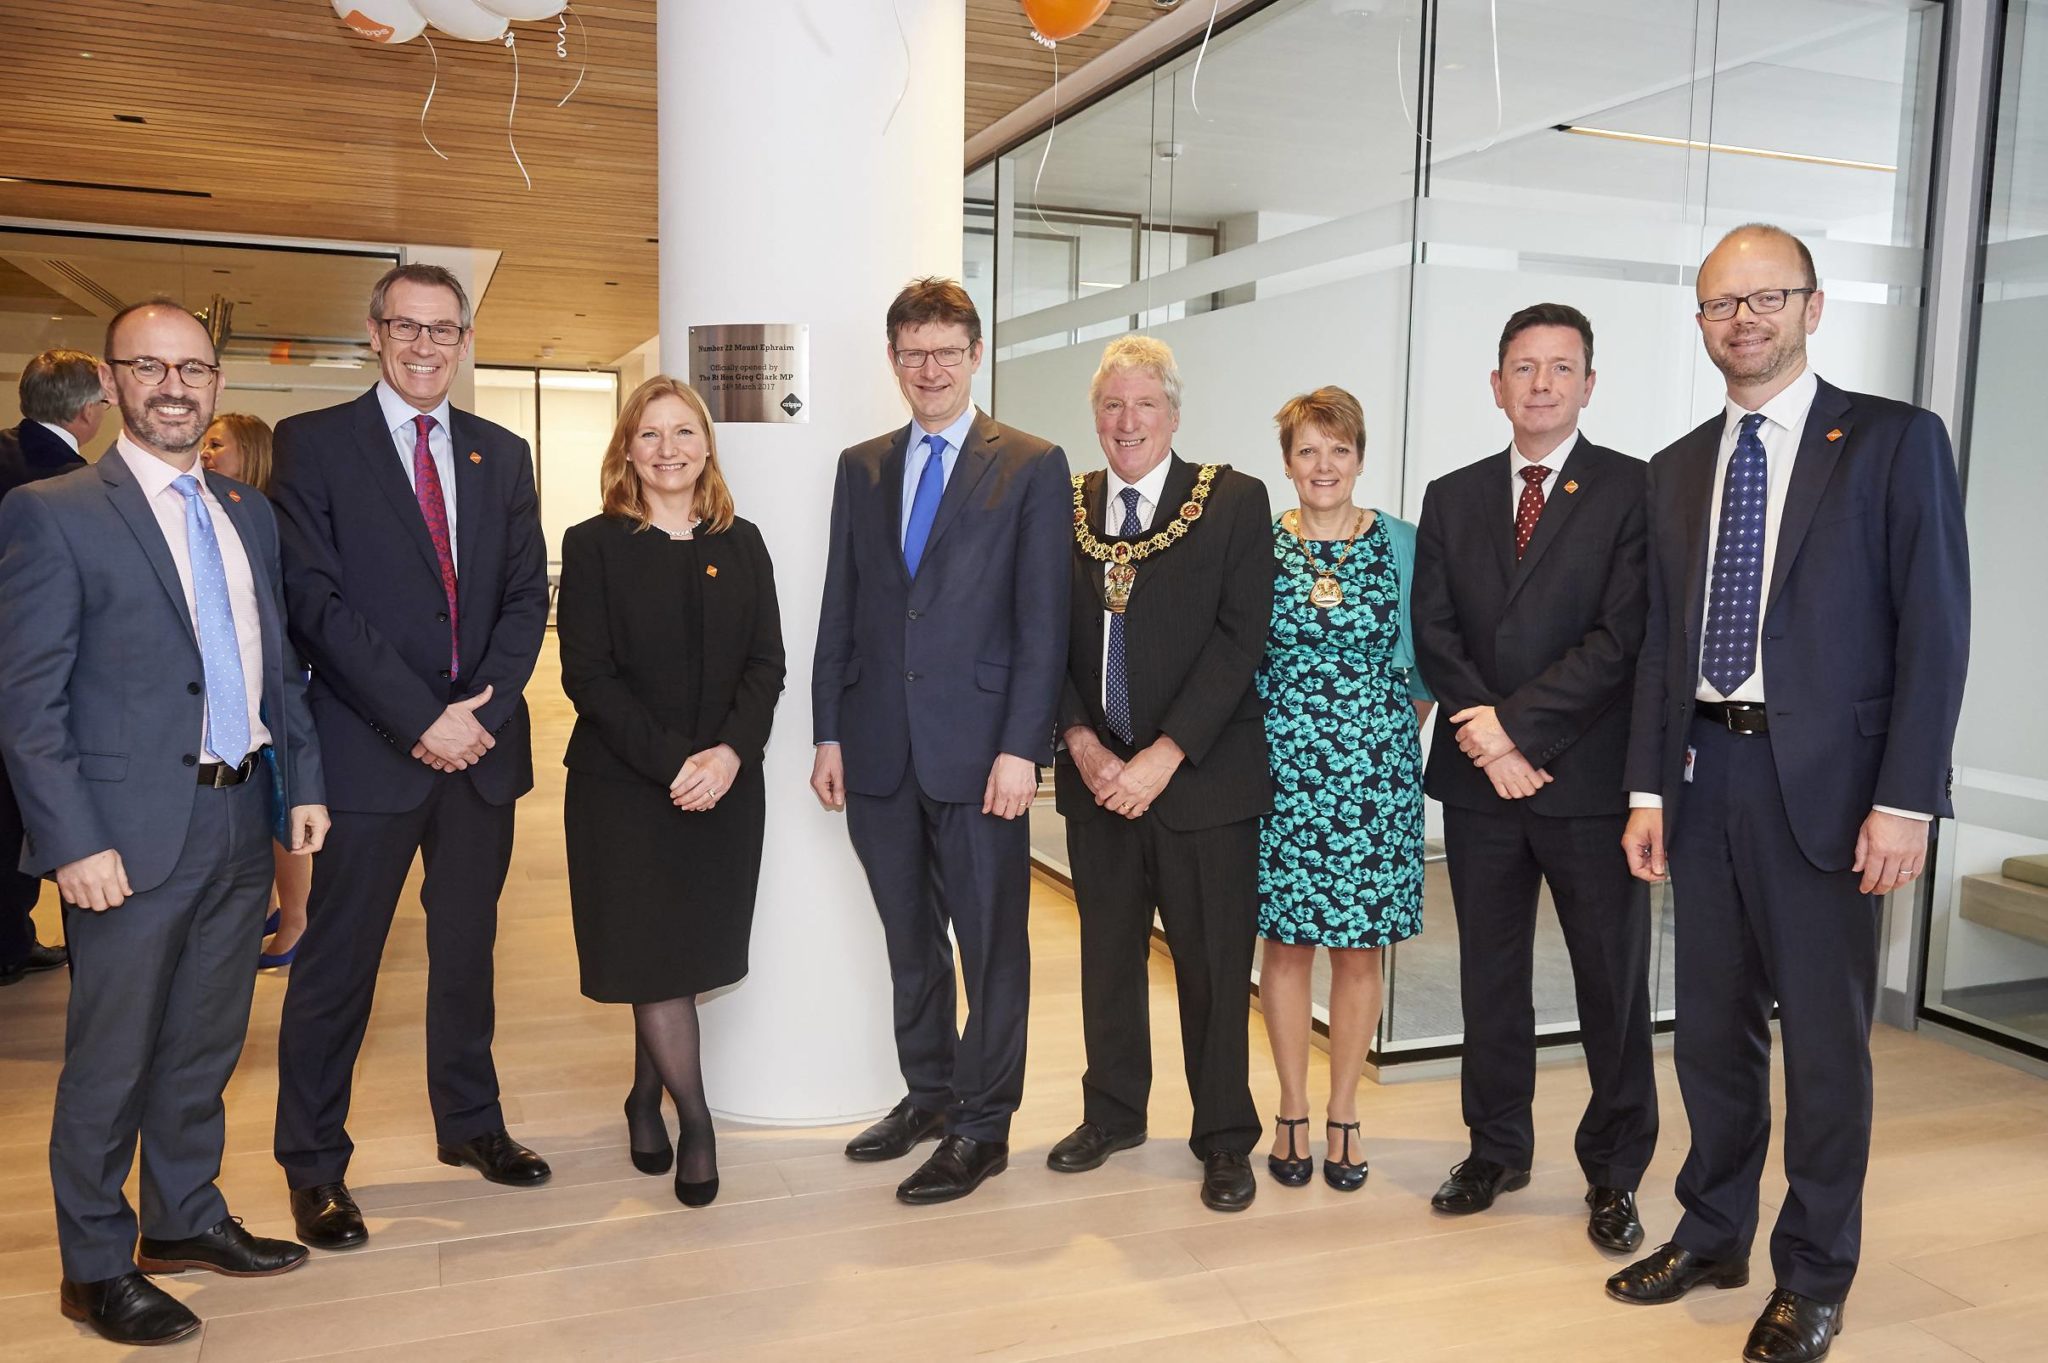 Grand opening of new Cripps offices hailed as vote of confidence in Tunbridge Wells